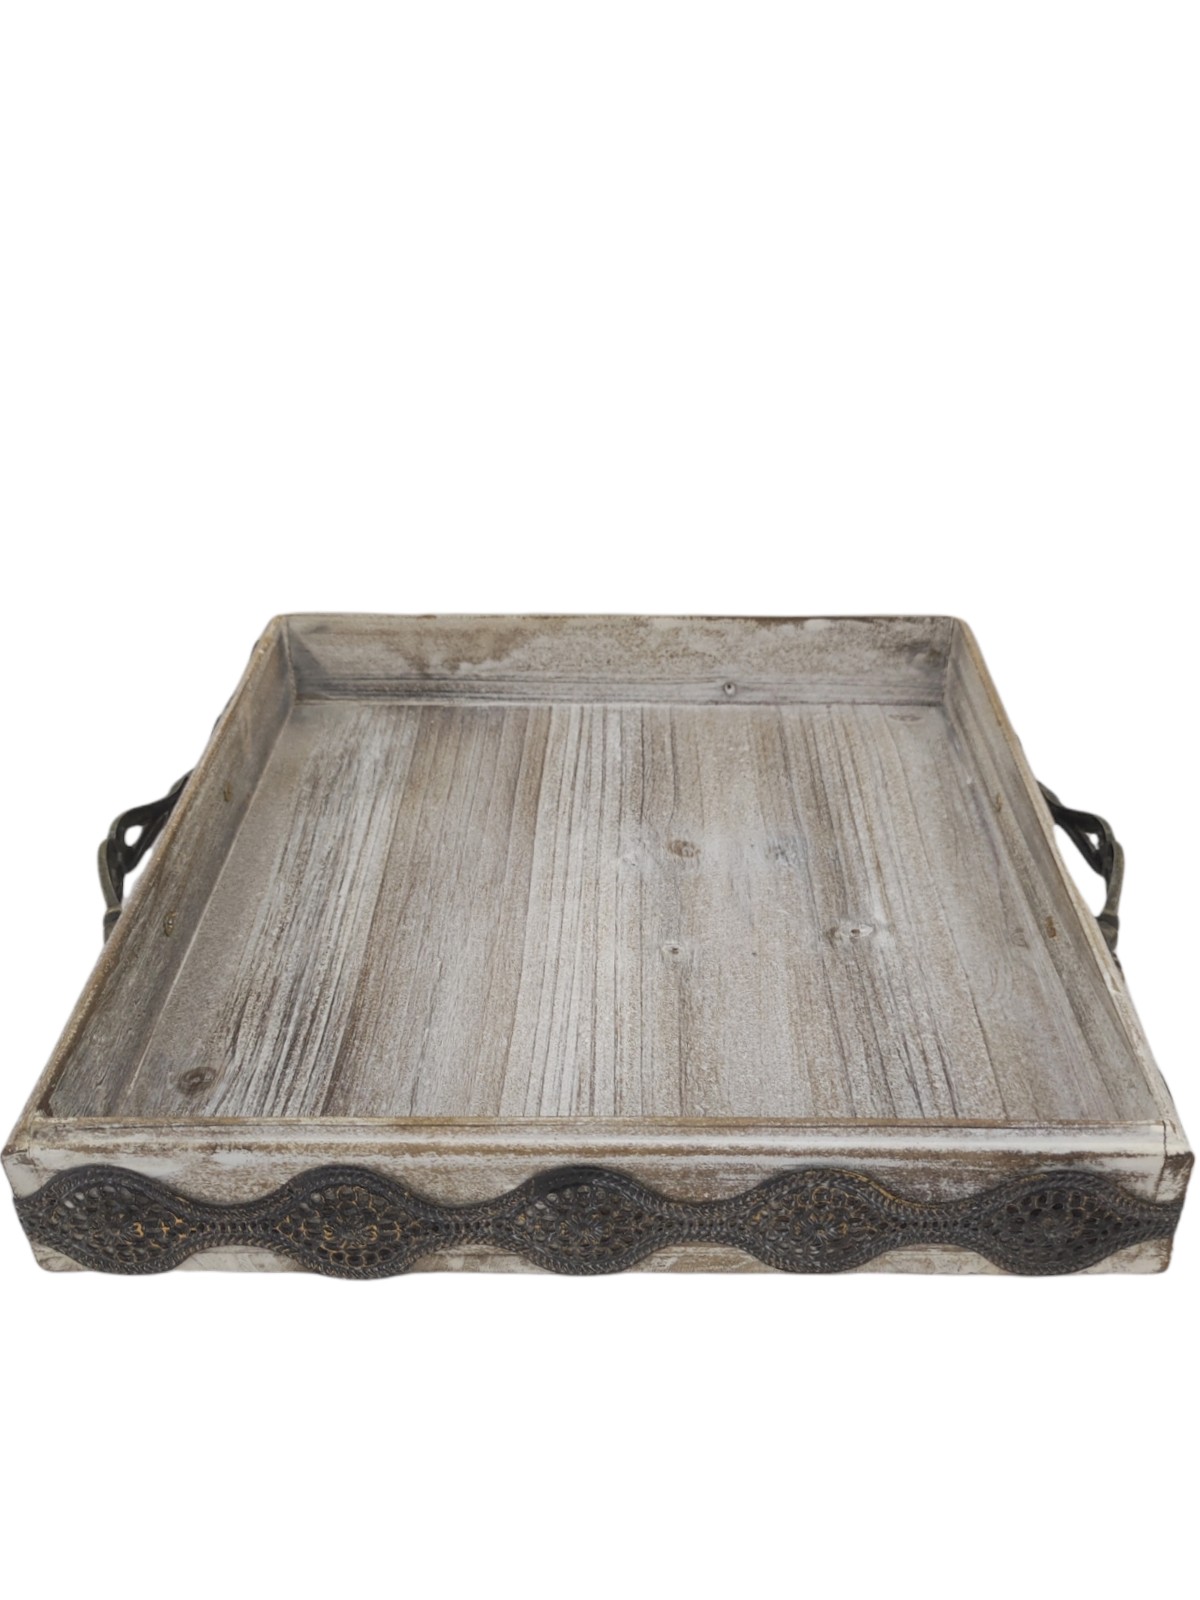 Square wooden tray with metal carving